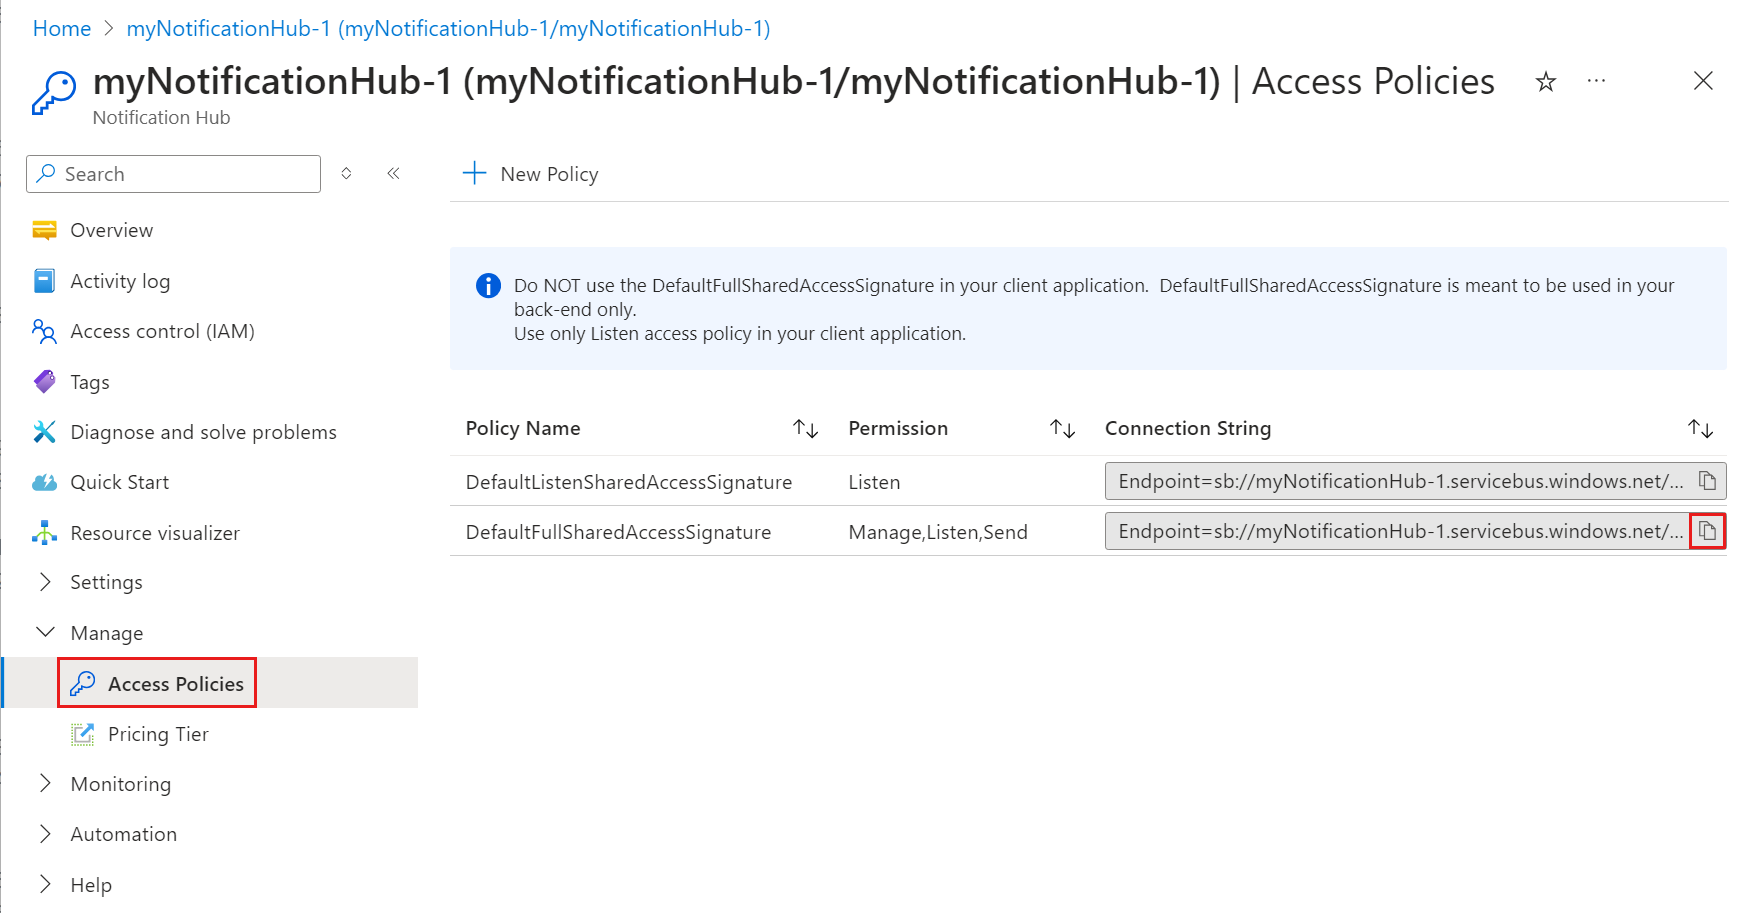 Copy the notification hub connection string